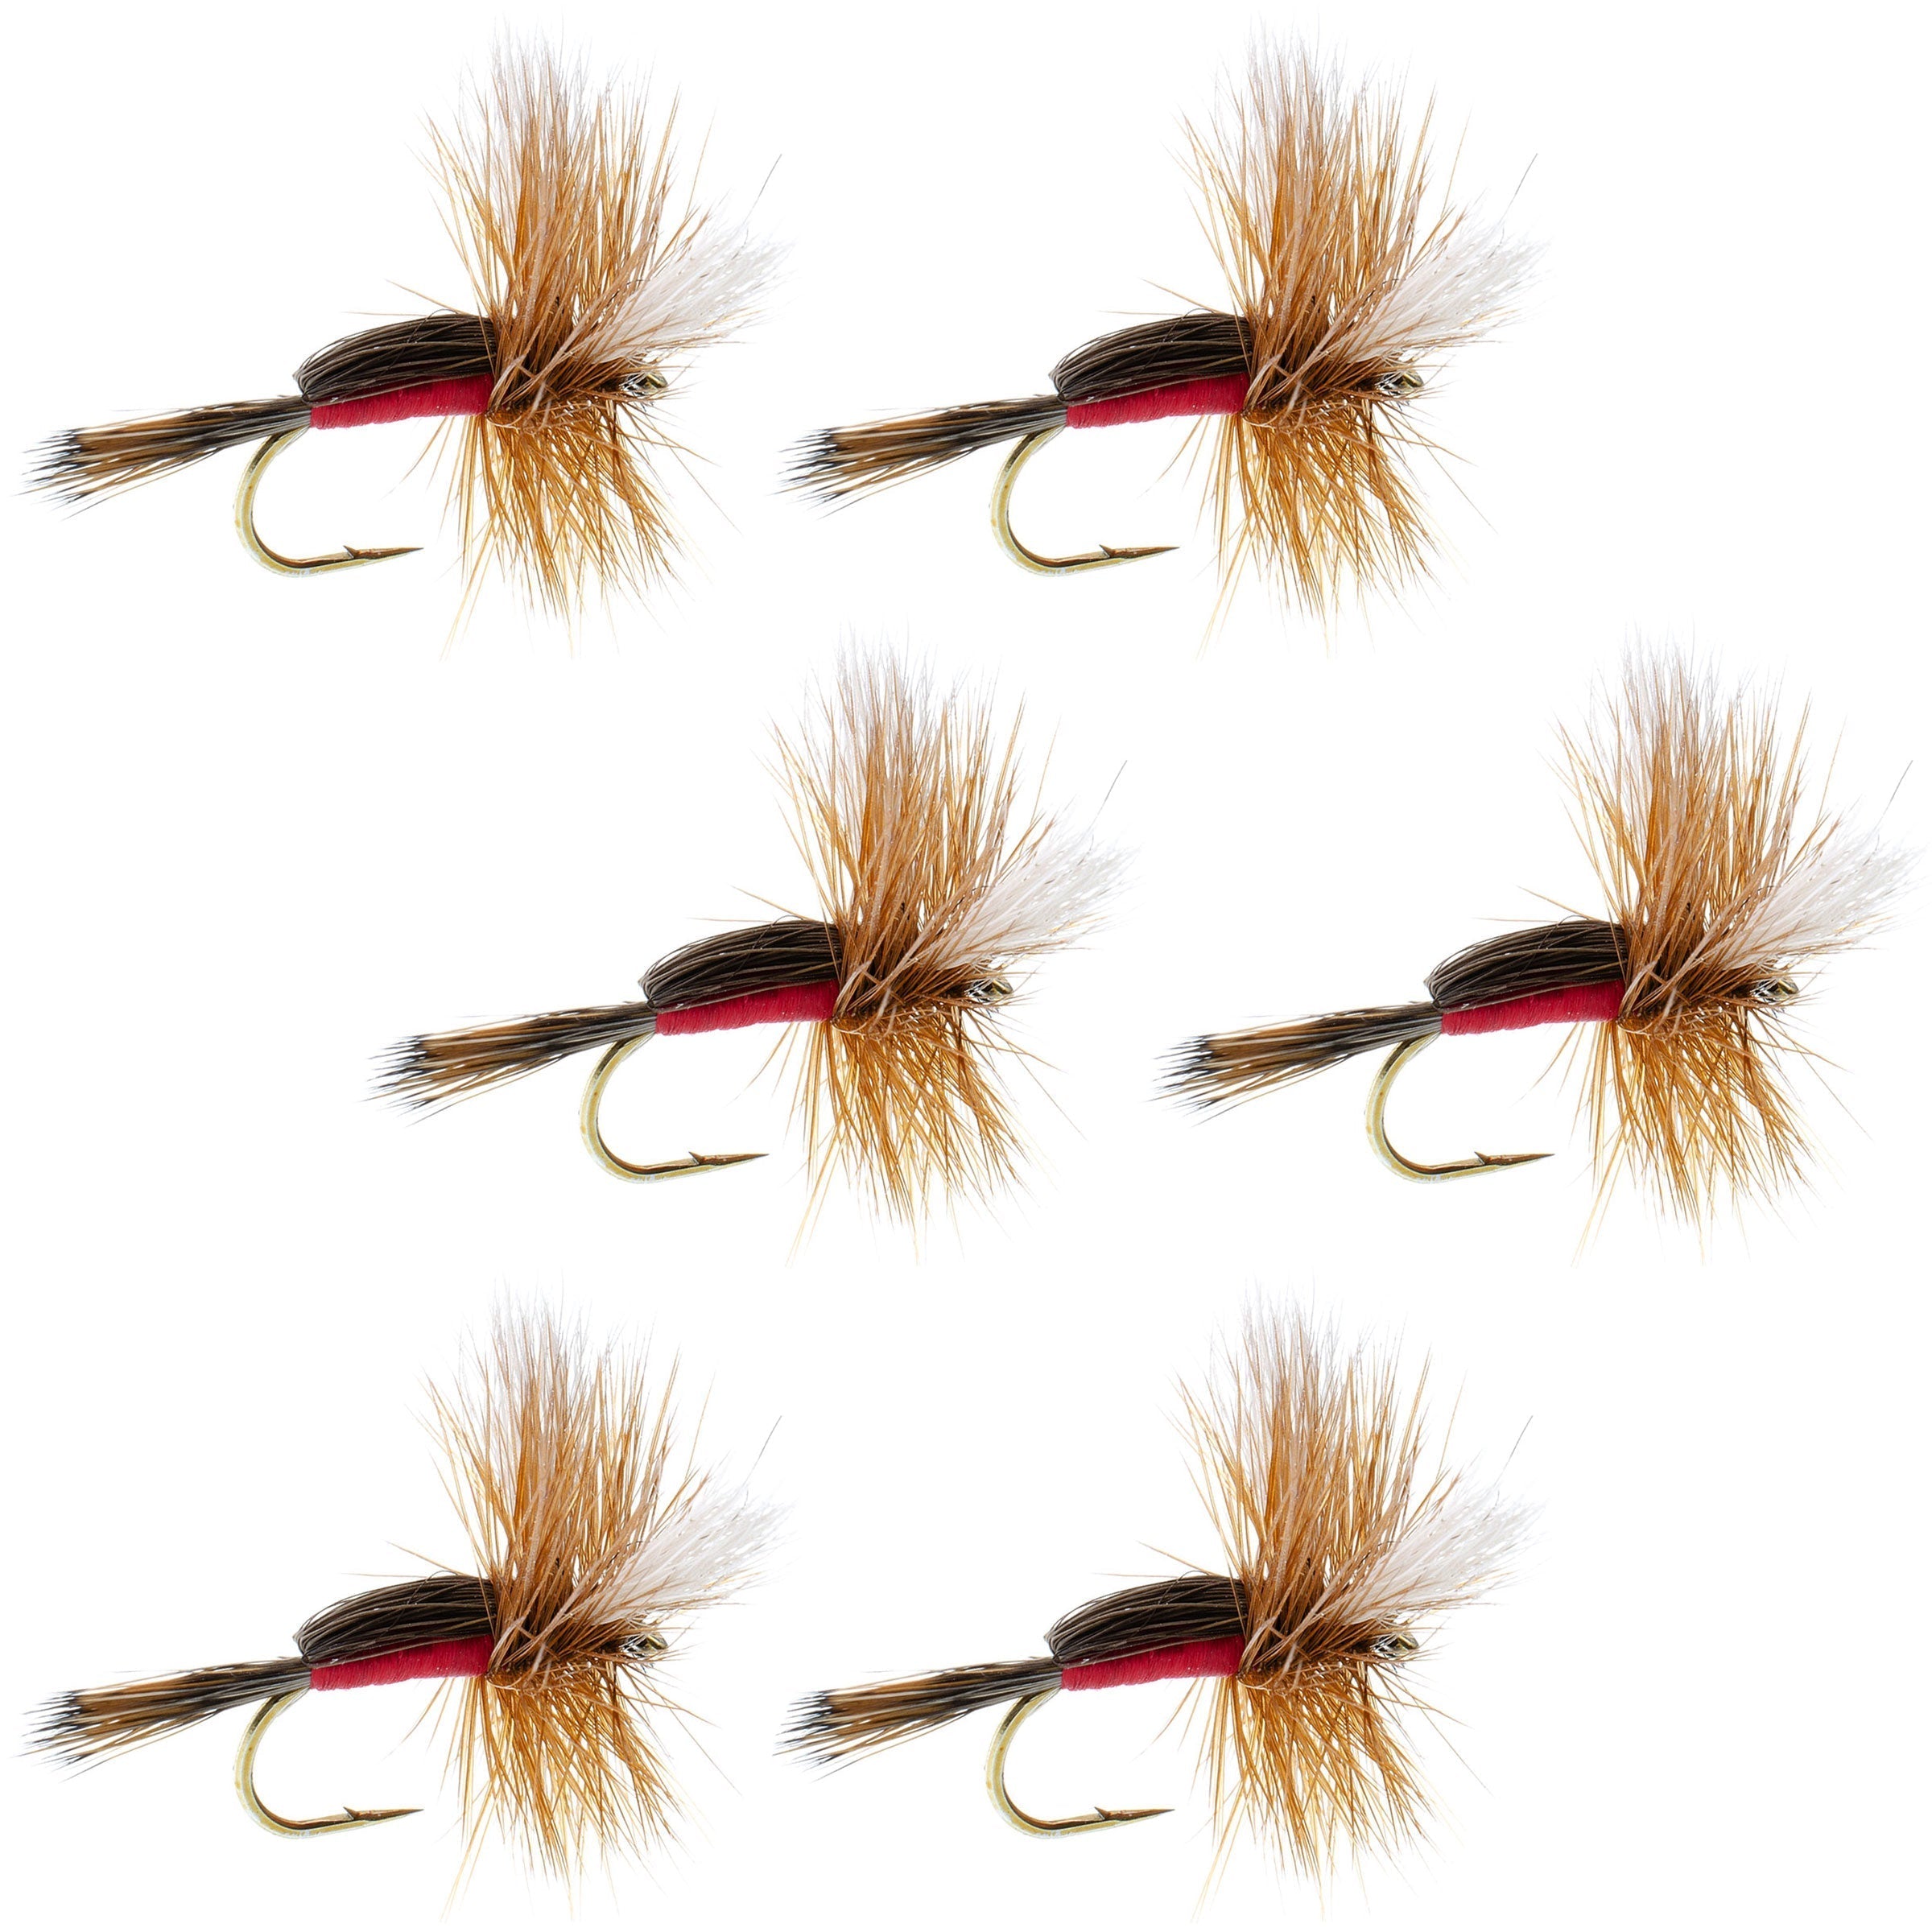 Royal Humpy Classic Hair Wing Dry Fly - 6 Flies Hook Size 10